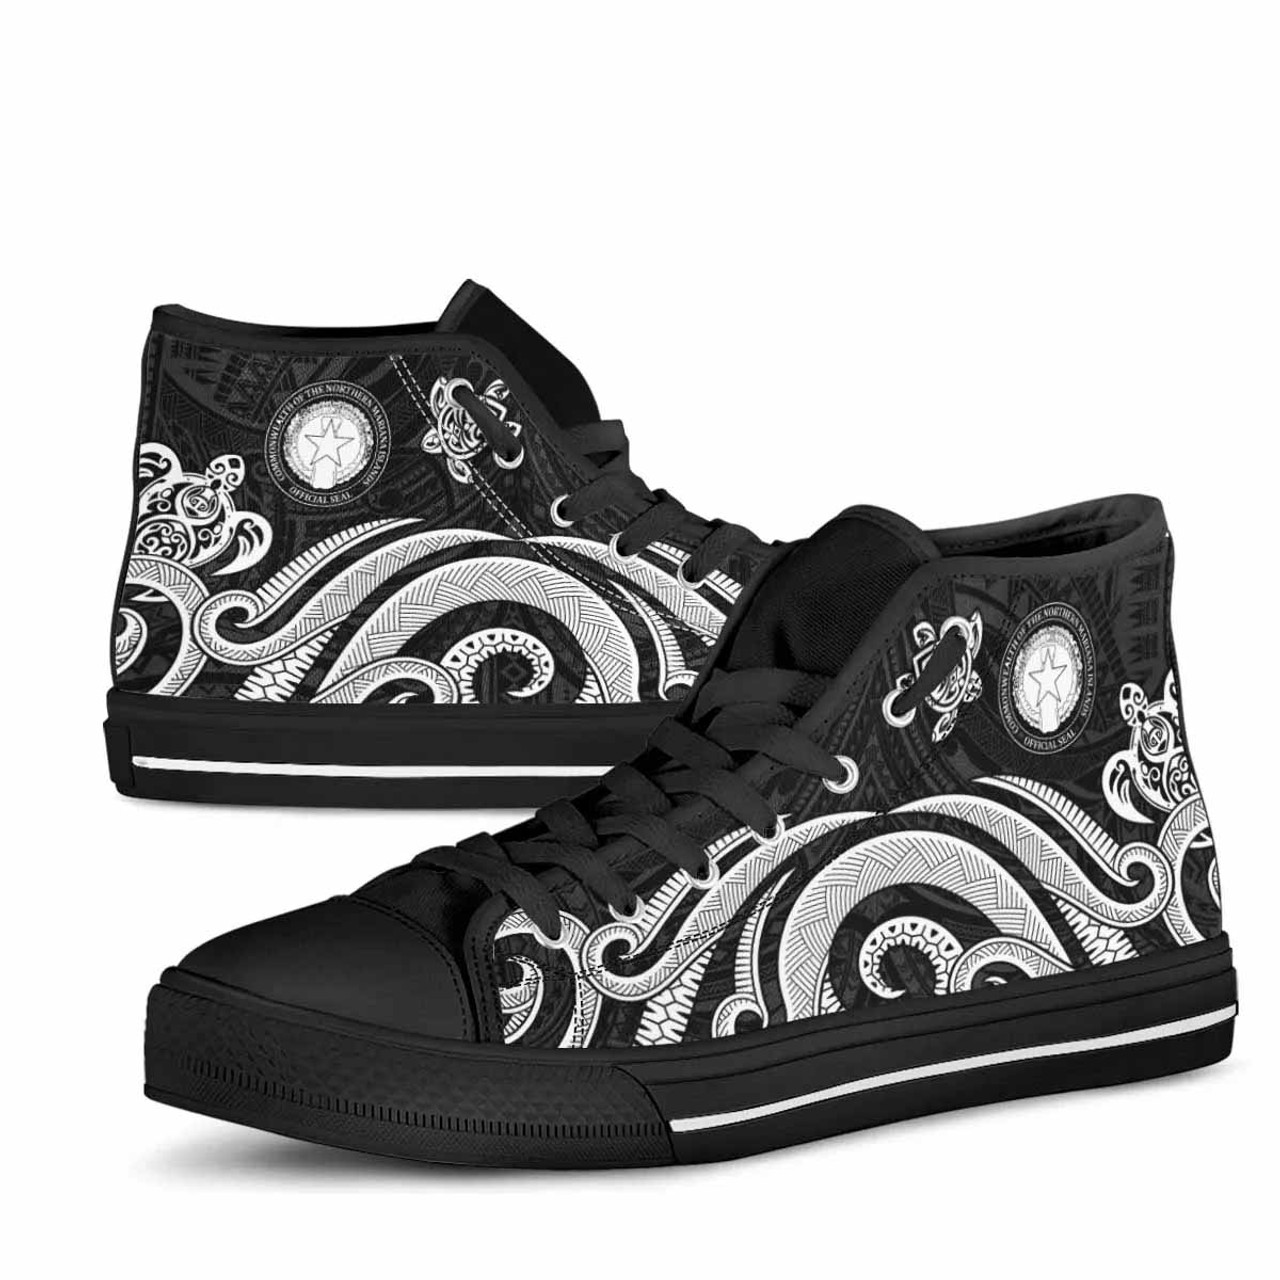 Northern Mariana Islands High Top Shoes - White Tentacle Turtle 2